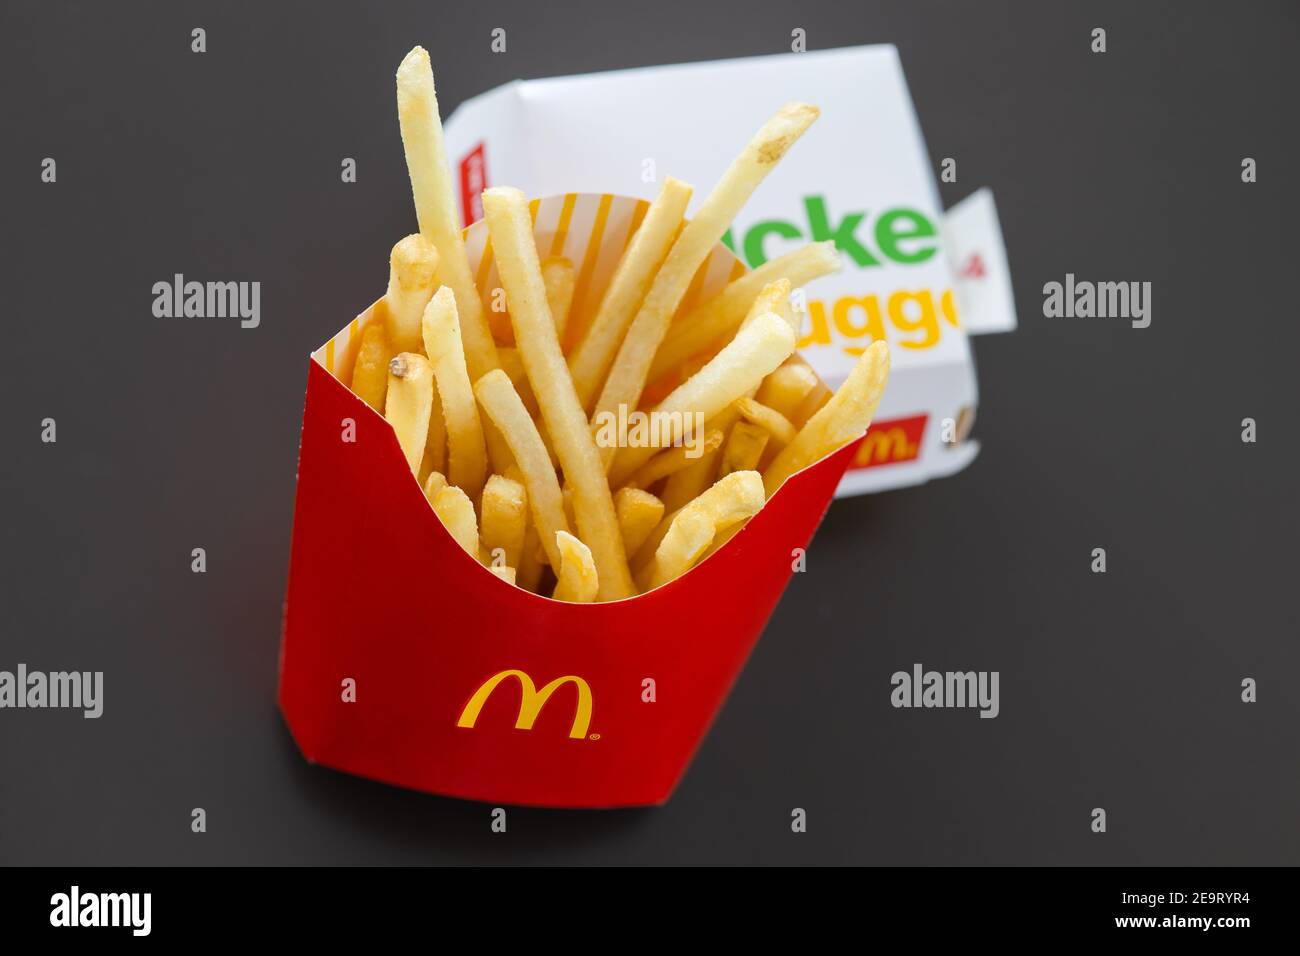 McDonald's French fries fastfood set, Most popular American style meal, McDonald's operates morethan 30,000 restaurants worldwide.30 December 2020, Ba Stock Photo